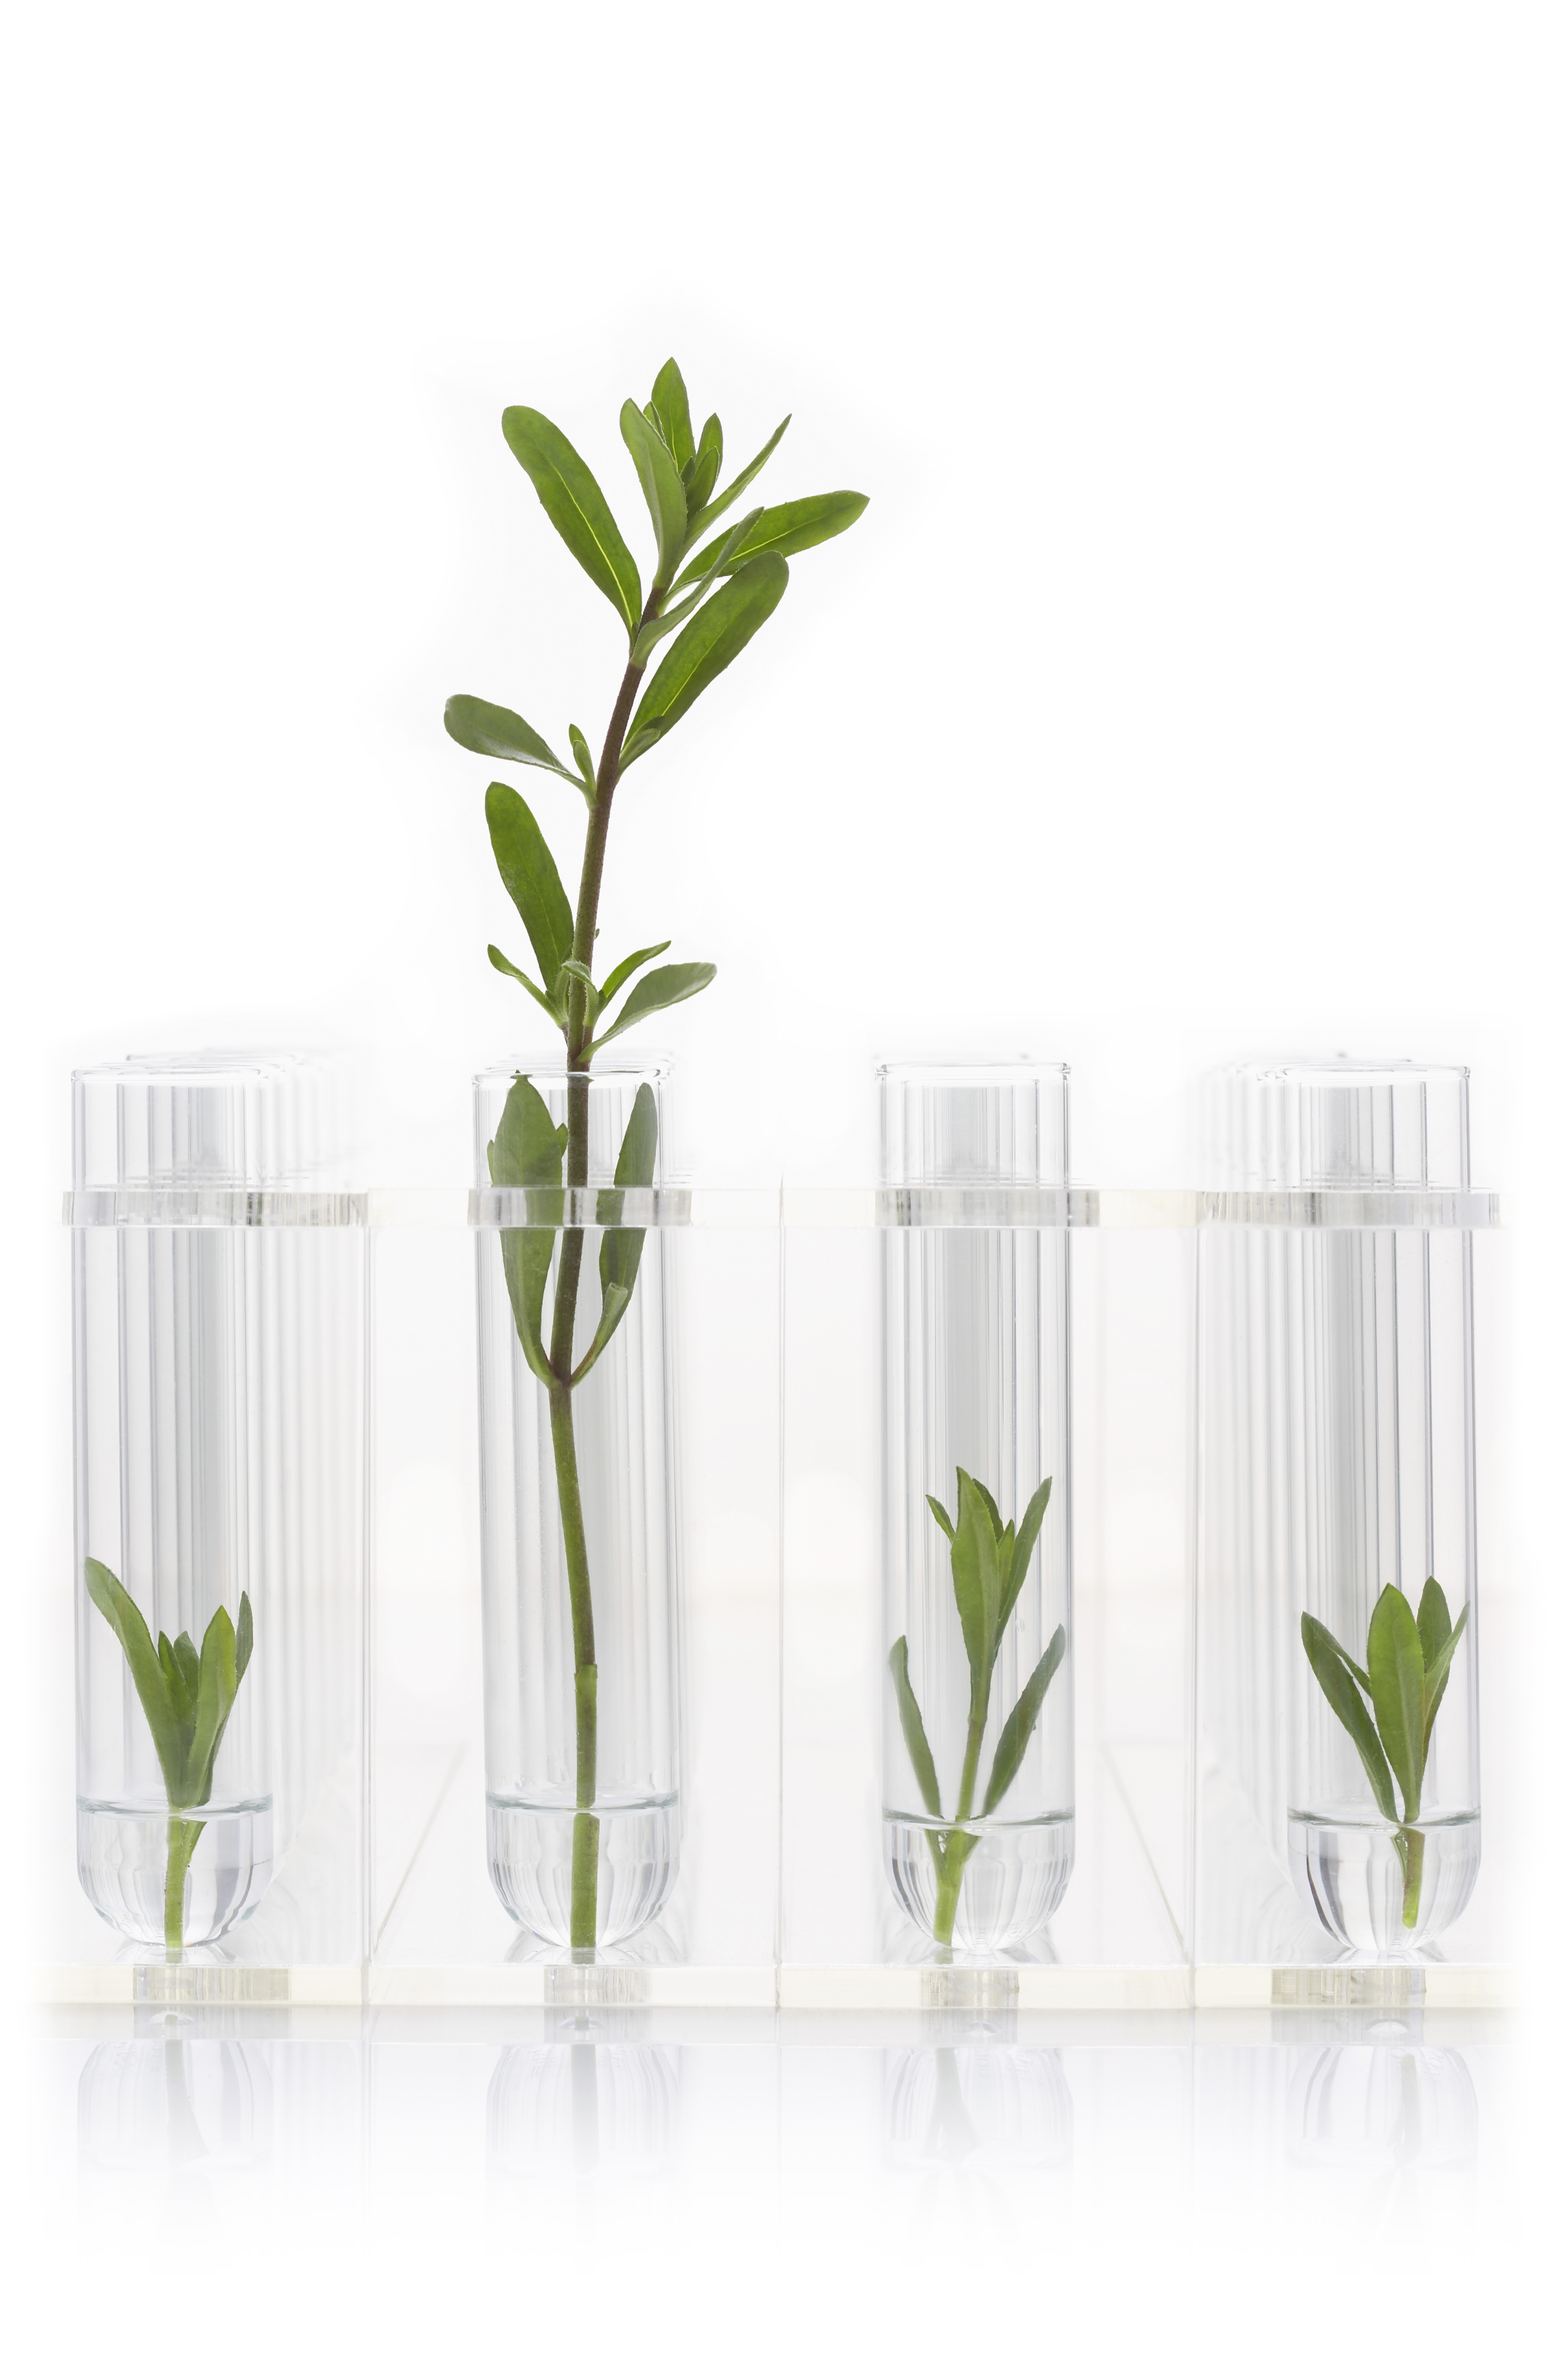 Plants in test tube white background